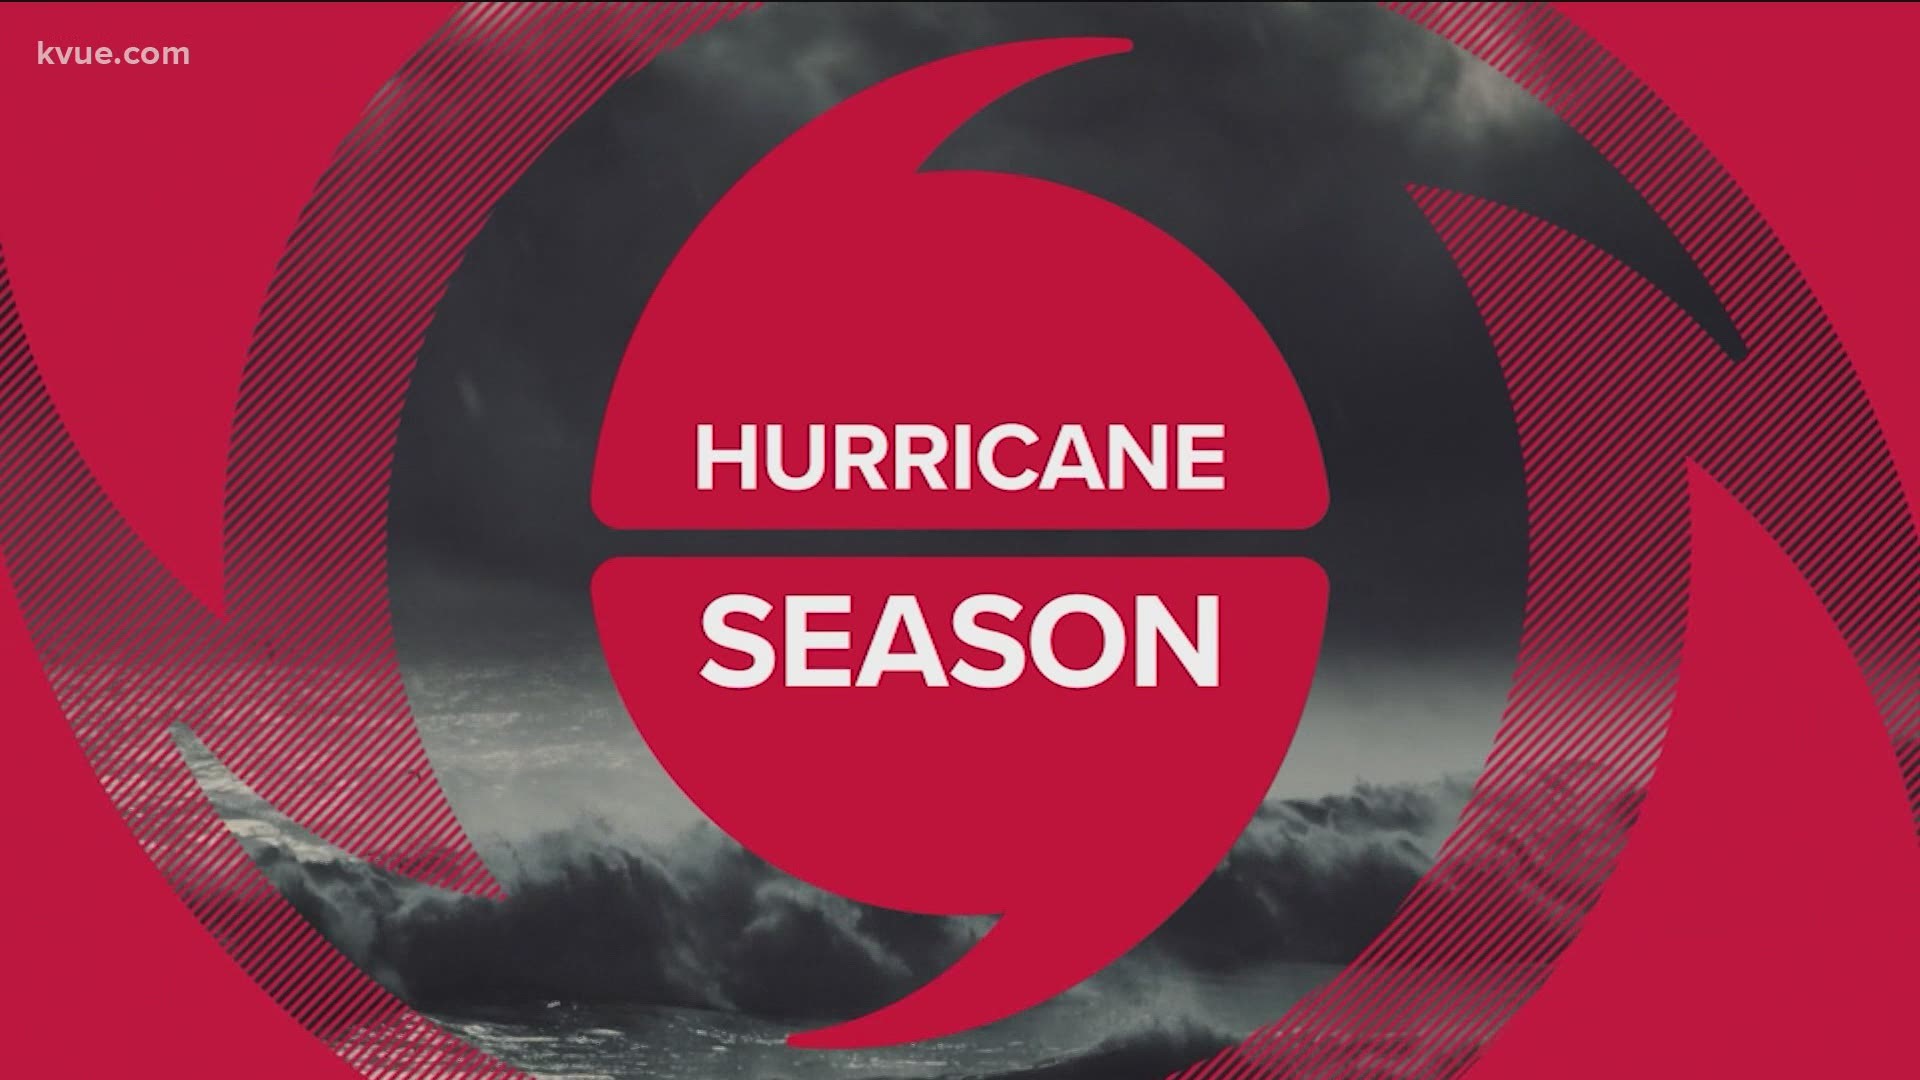 The National Oceanic and Atmospheric Administration predicts an active hurricane season with 13 to 20 named storms.